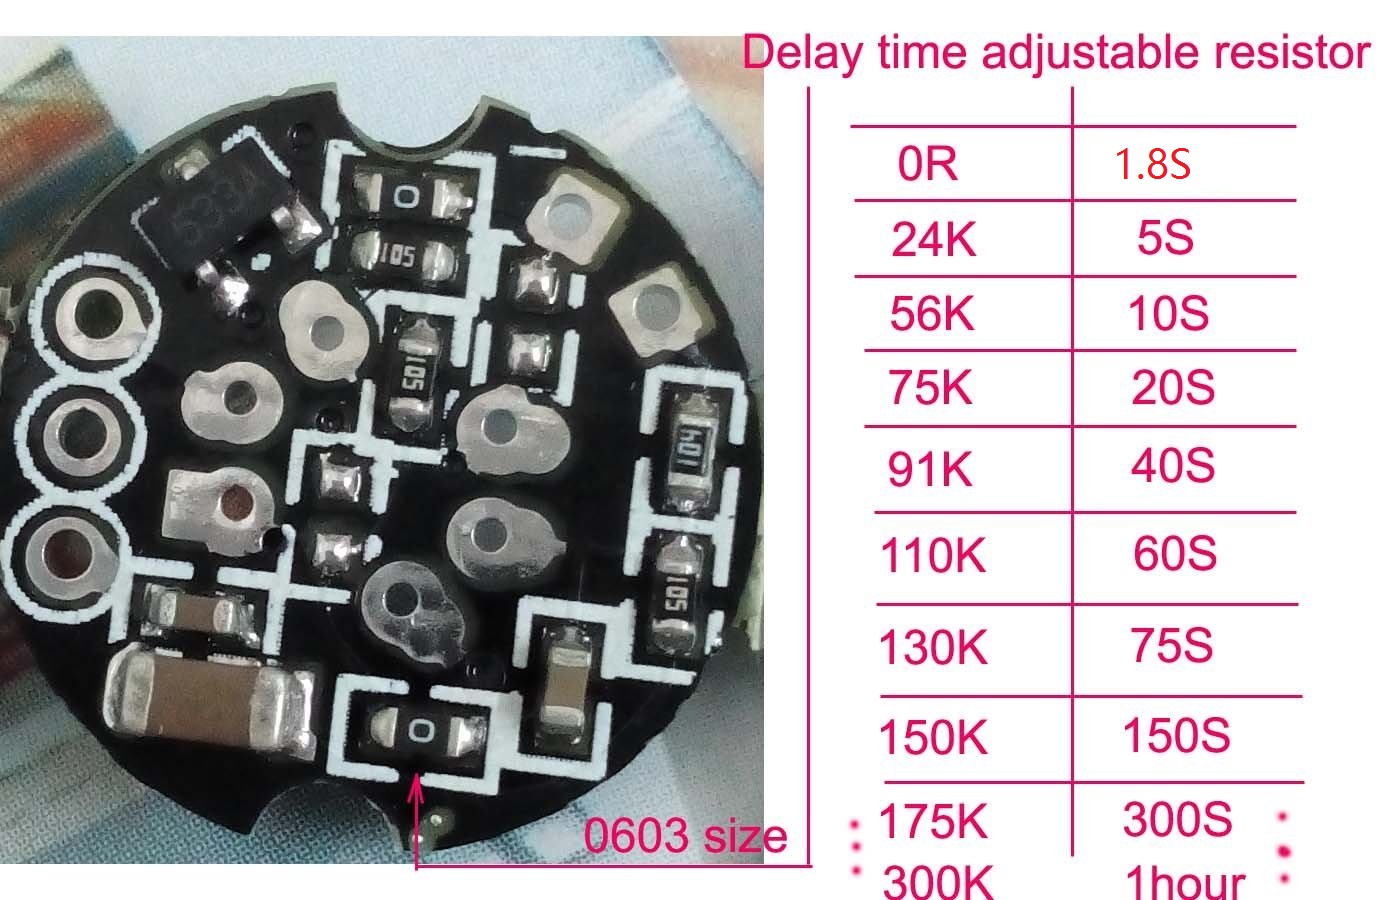 dwmzone-dwm-pm-6-20ua-lowest-standby-current-18s-to-1hour-delay-time-mini-infrared-pir-module-delay-time-low-delay-time-1.8S